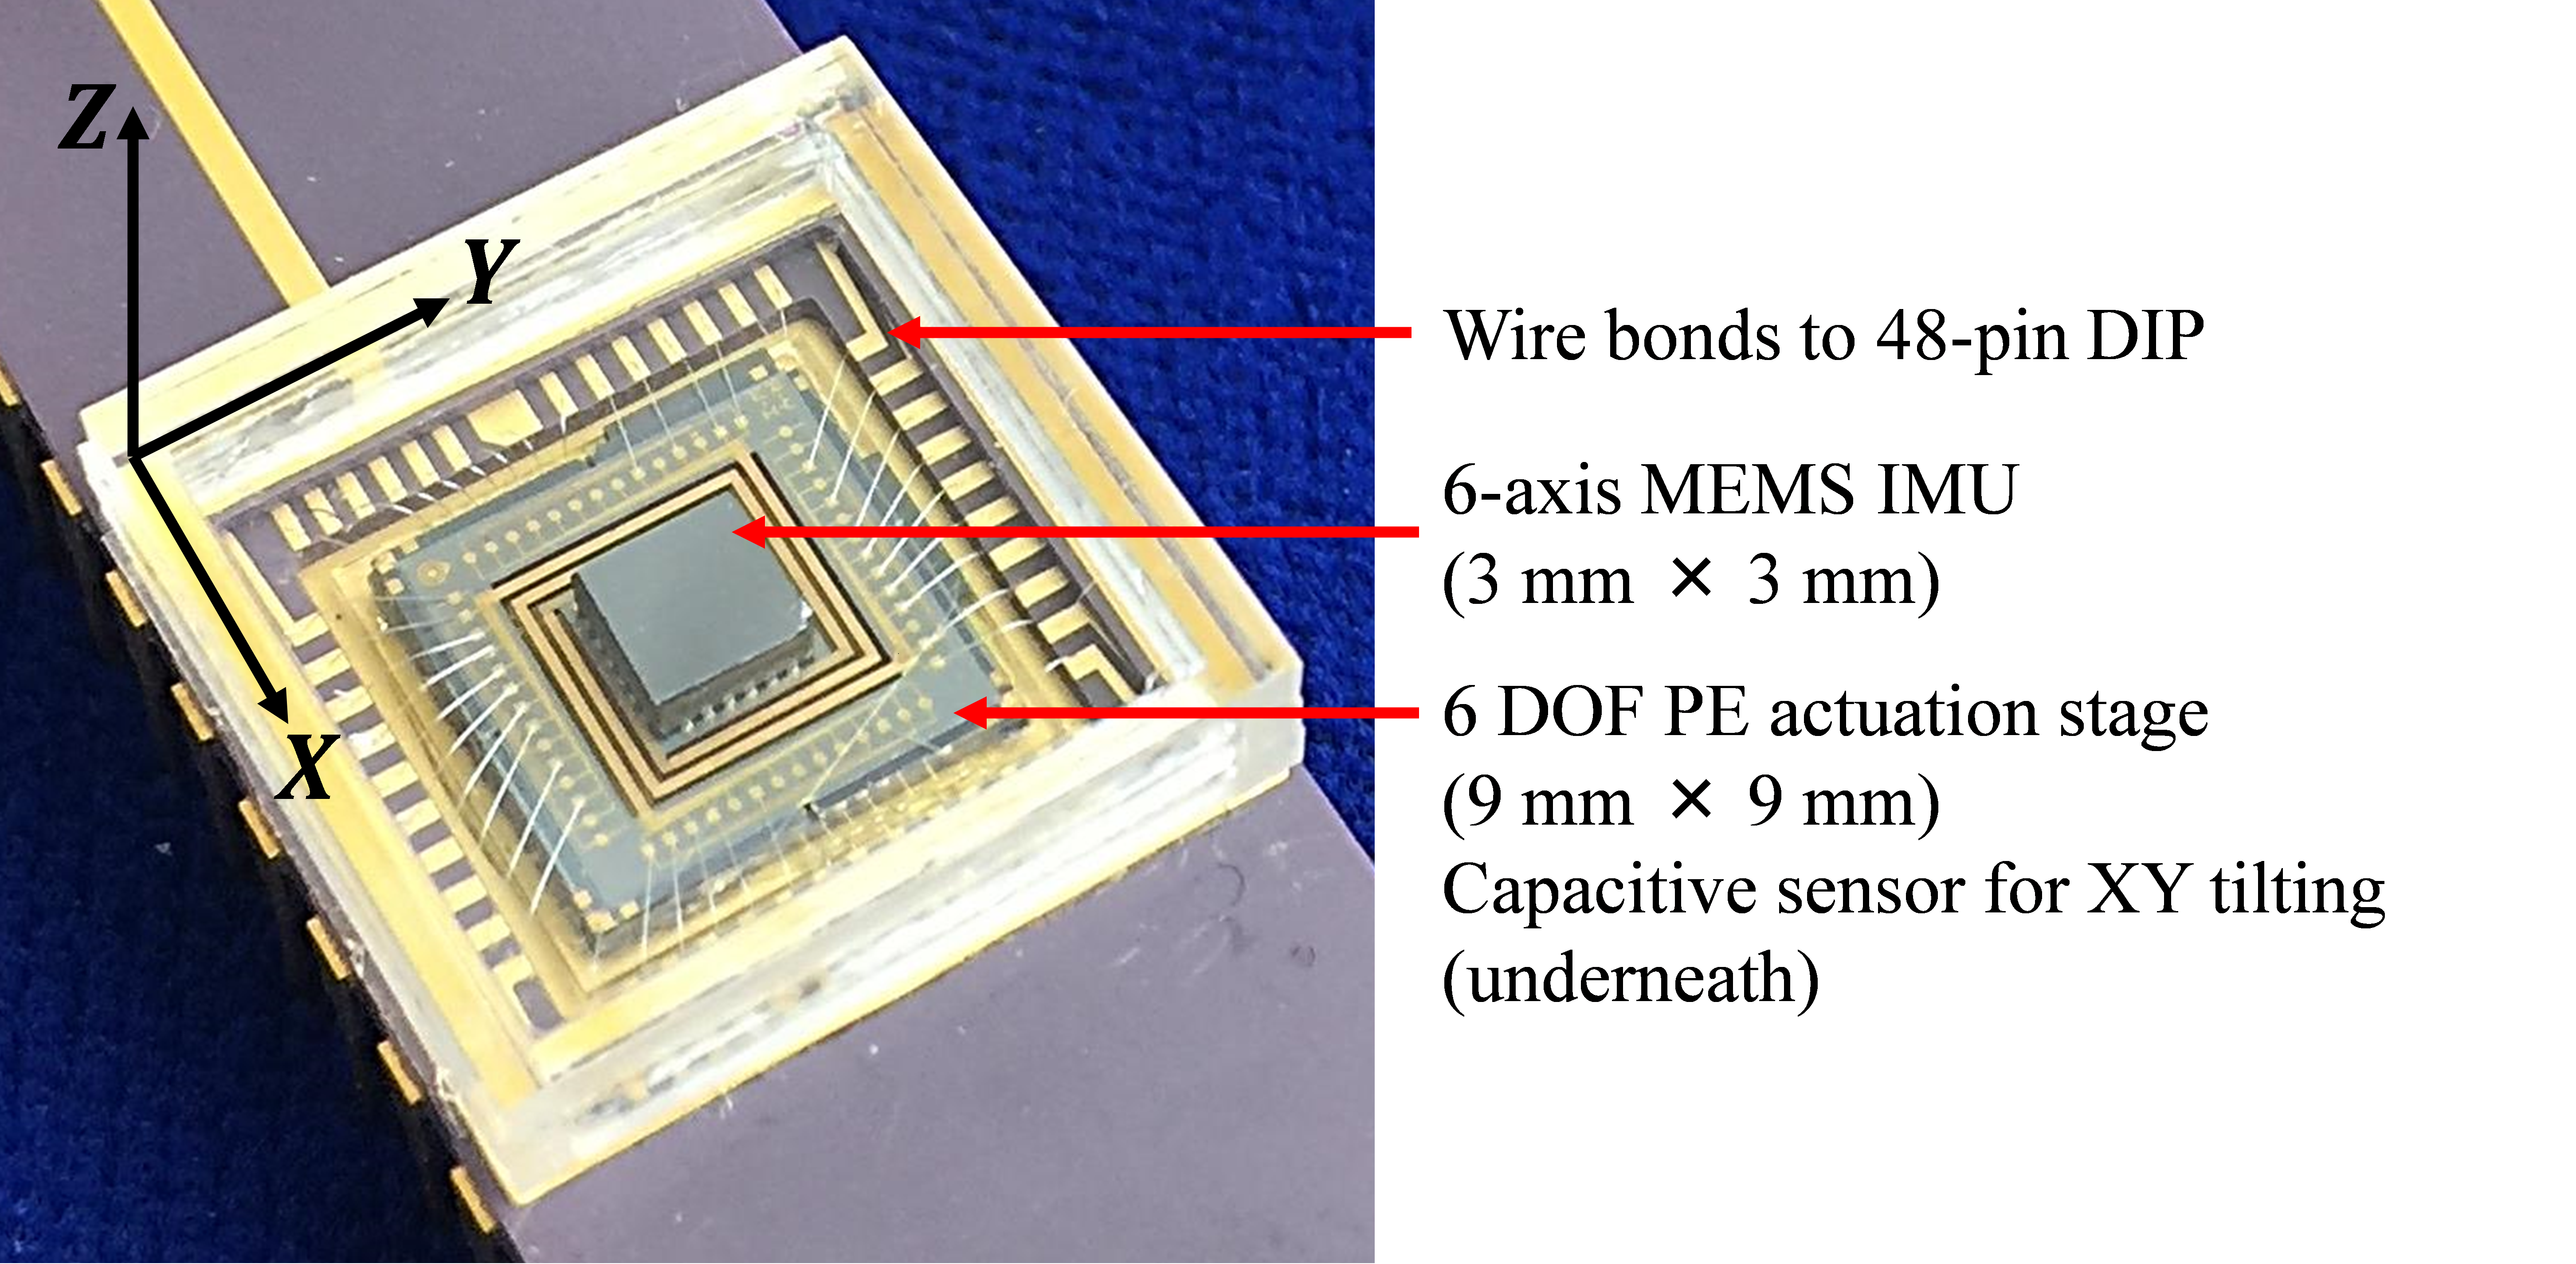 A prototype piezoelectric 6-DOF microstage with inertial sensor payload and electrostatic angular velocity sensing